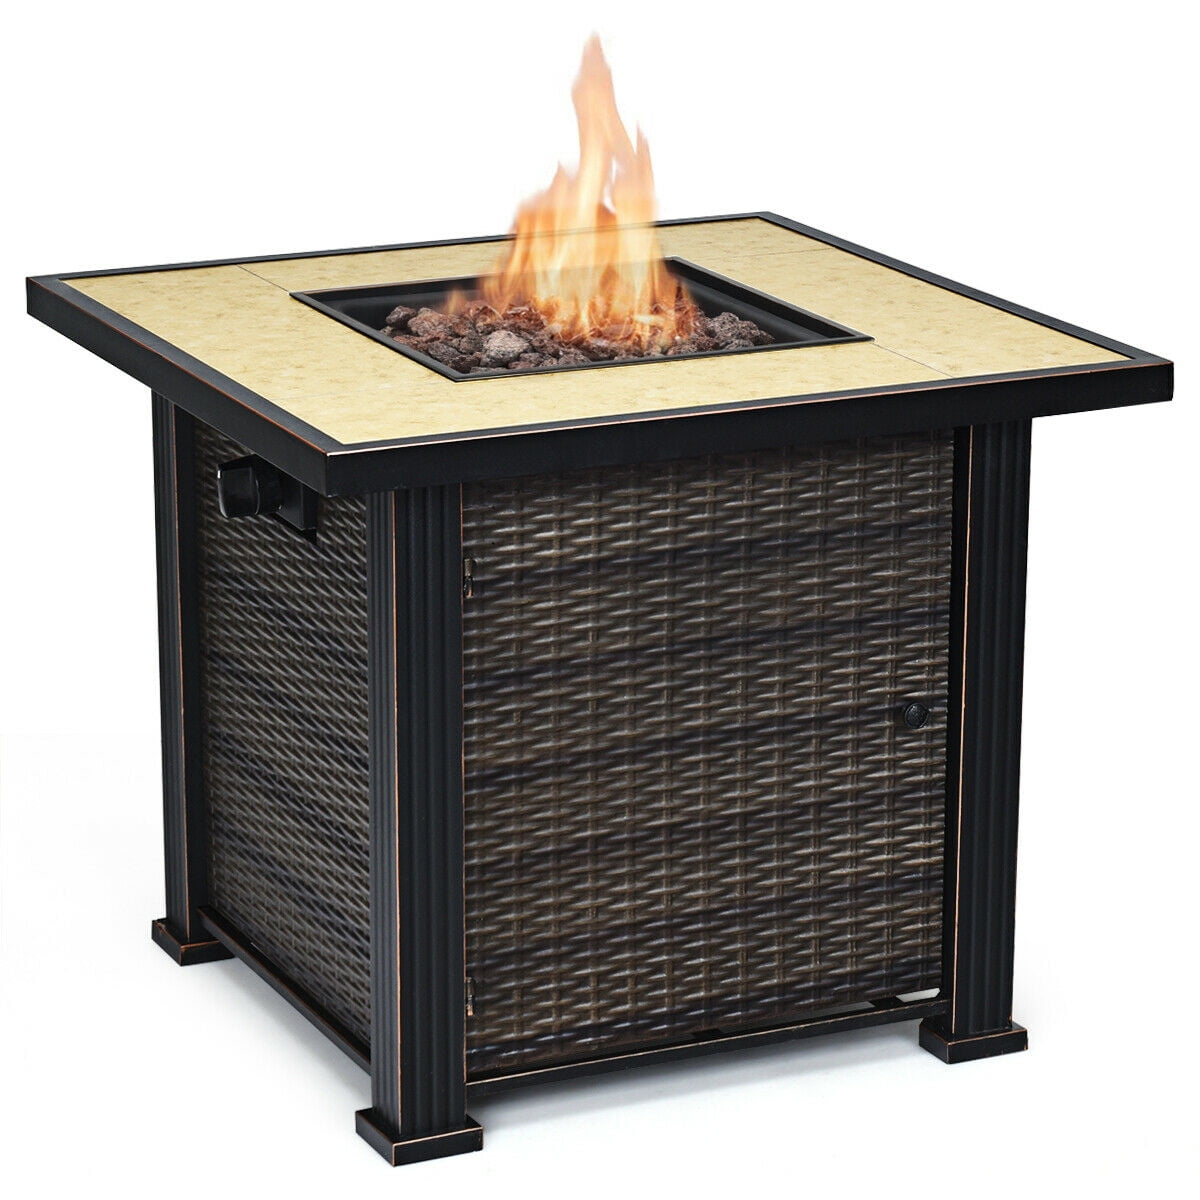 30 Square Propane Gas Fire Pit 50000, Outdoor Propane Fire Pit Table Canada